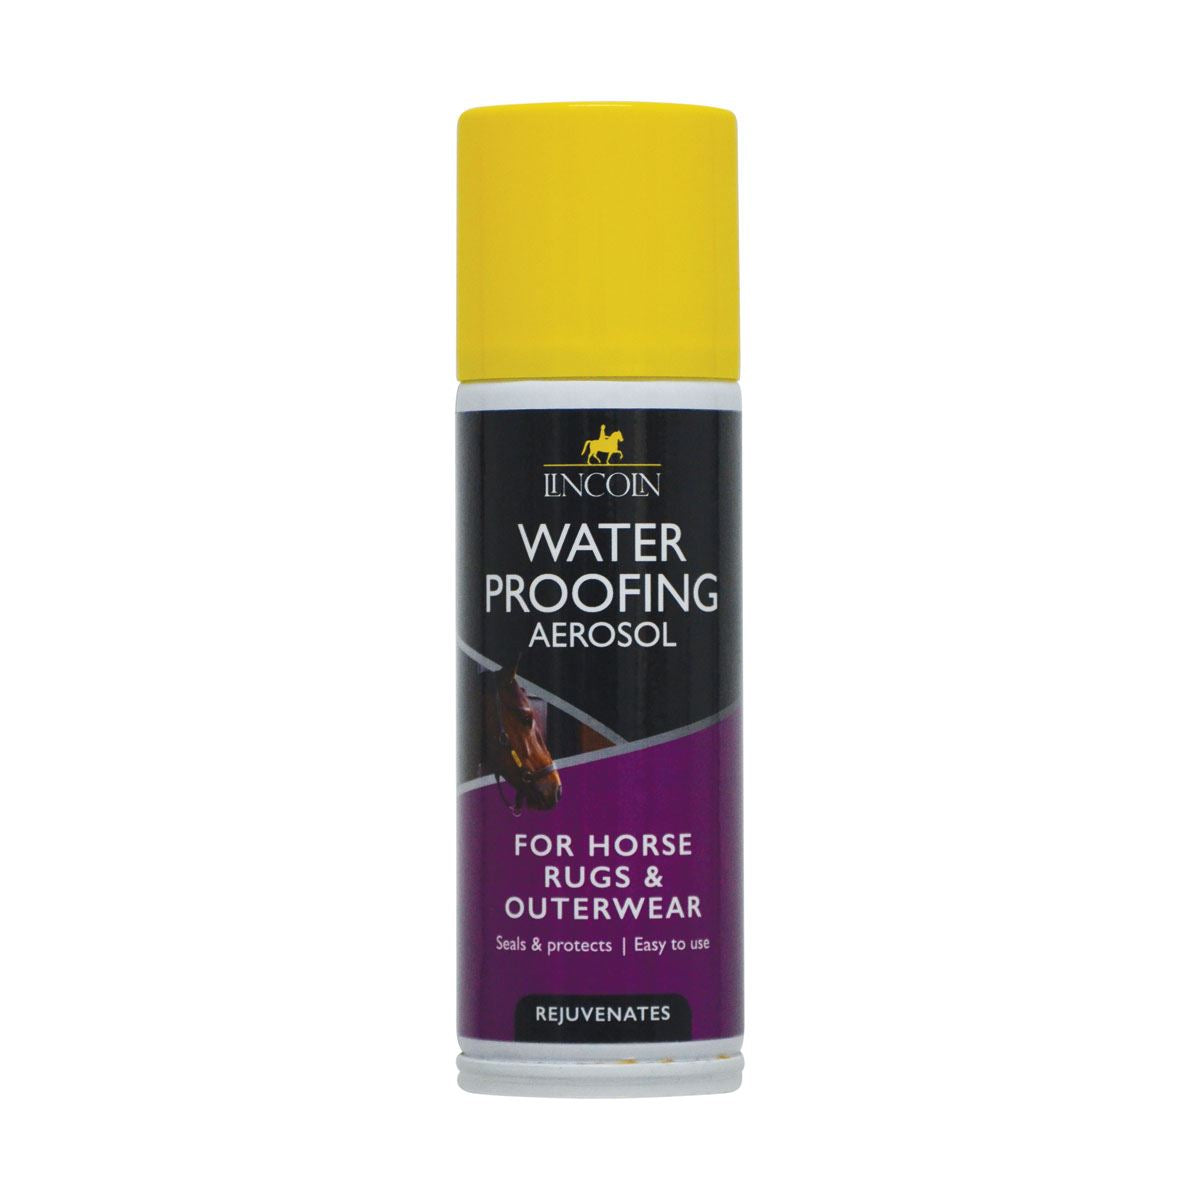 Lincoln Water Proofing Aerosol - Just Horse Riders